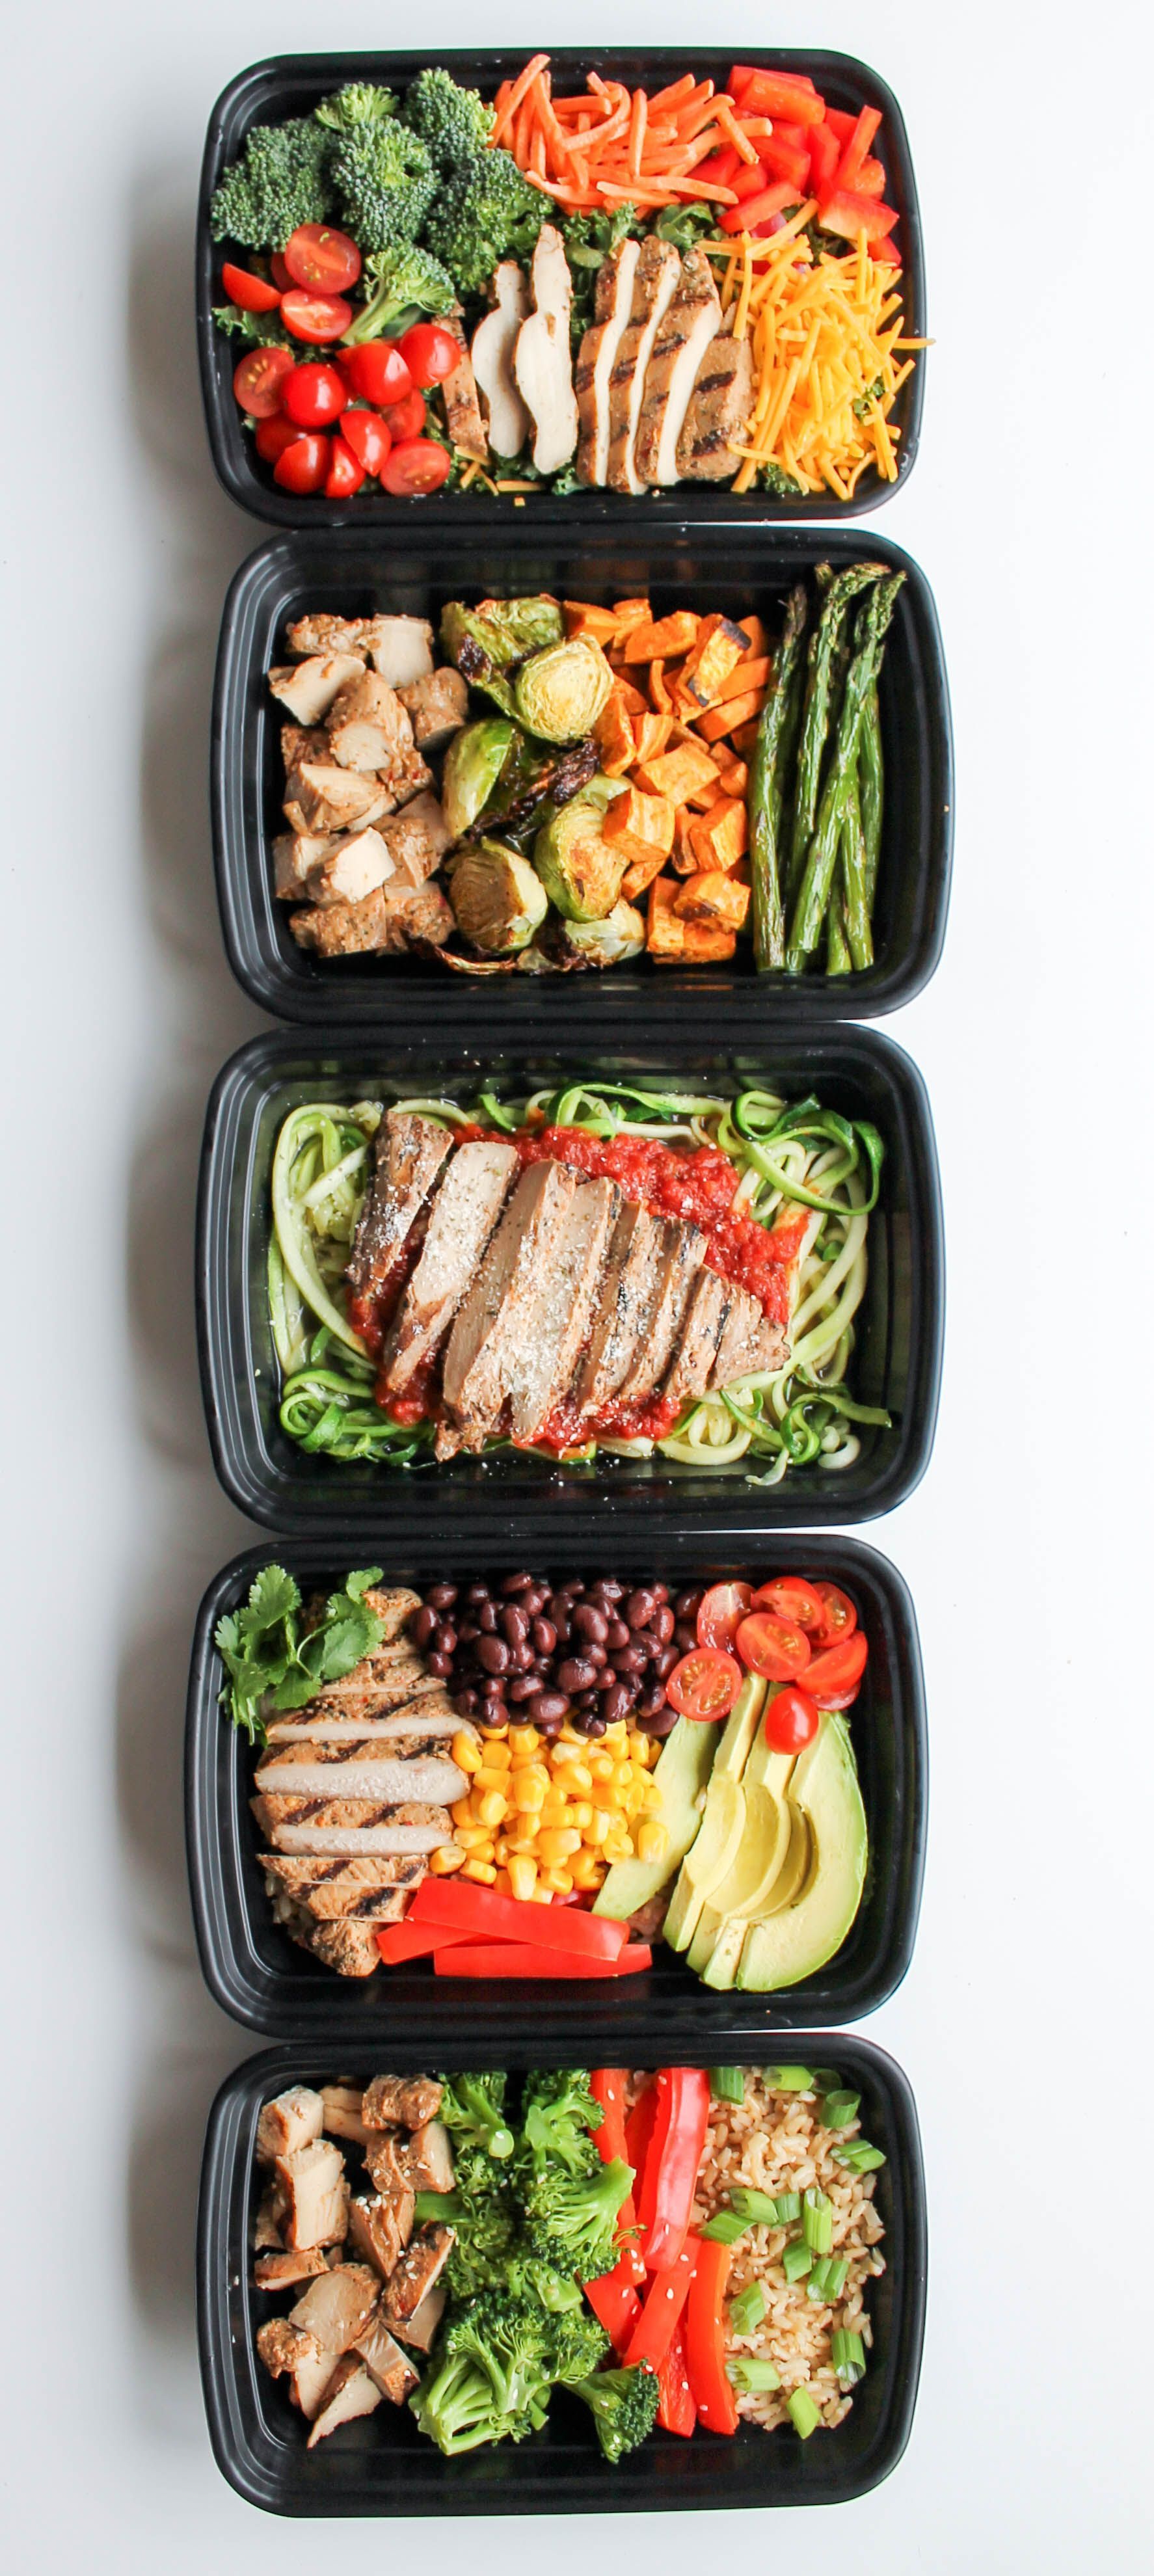 Easy Chicken Meal Prep Bowls: 5 Ways - Smile Sandwich - Easy Chicken Meal Prep Bowls: 5 Ways - Smile Sandwich -   15 fitness Food week ideas